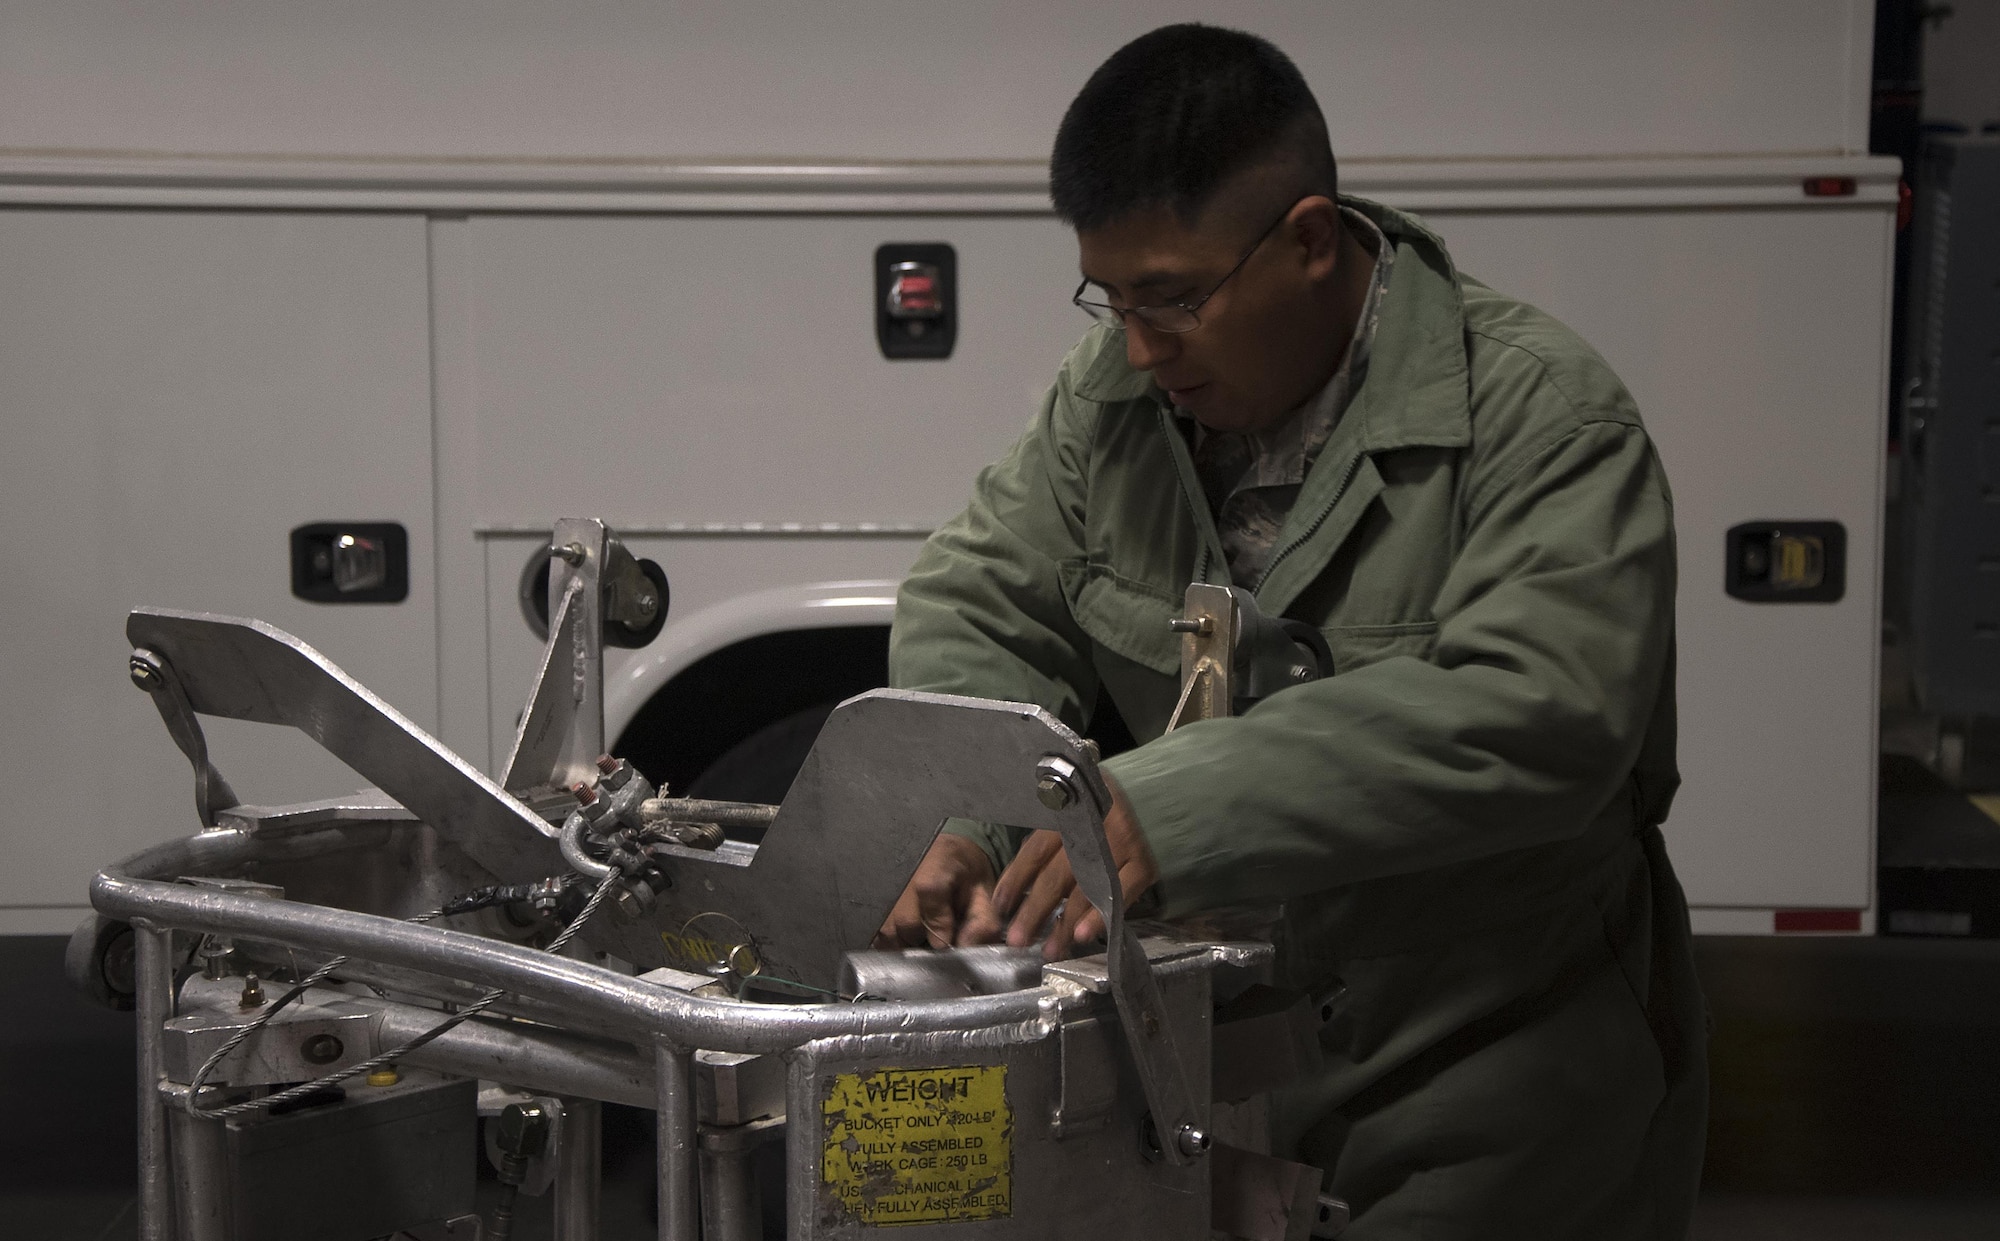 Senior Airman Jaime Sibri Llapa, 90th Missile Maintenance Squadron maintainer, inspects a guided missile maintenance platform at F.E. Warren Air Force Base, Wyo., Aug. 22, 2016. Maintainers inspected their equipment and prepared their vehicles before departing for the missile field. The 90th MMXS maintains 150 Minuteman III ICBMs and the associated launch facilities spread across three states and 9,600 square-miles. (U.S. Air Force photo by Senior Airman Brandon Valle)